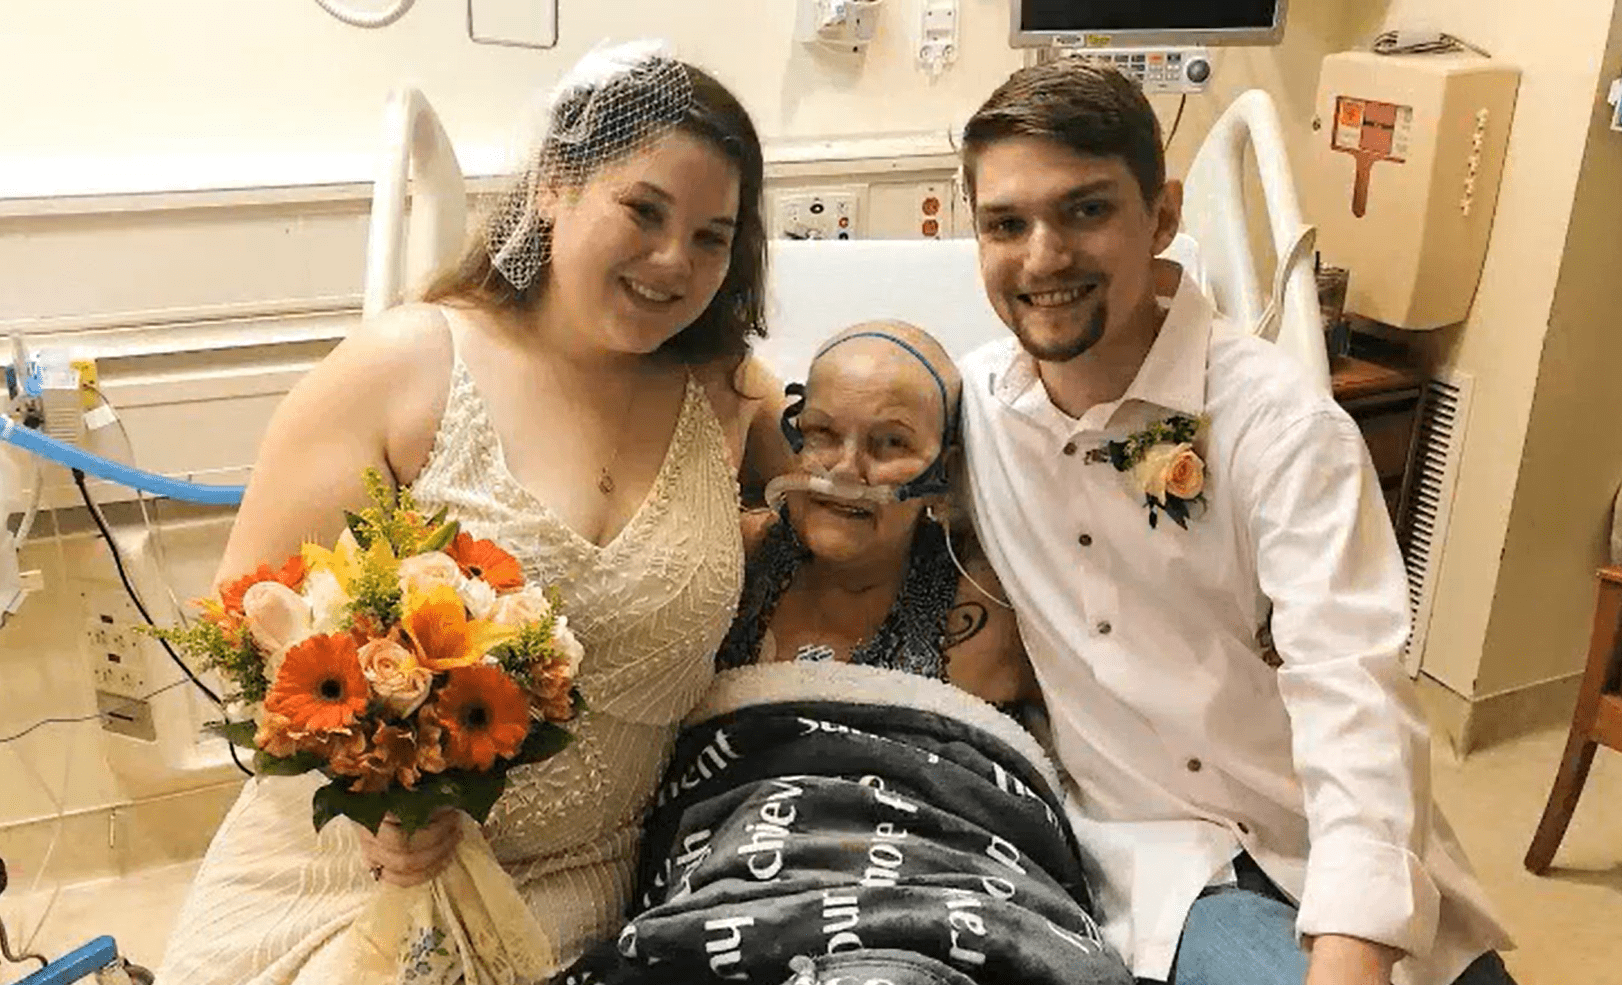 Sean and her fiancé sitting with Sean’s grandmother at the Methodist Hospital, Northeast on their wedding day. │Source: facebook.com/methodisthealthcaresa